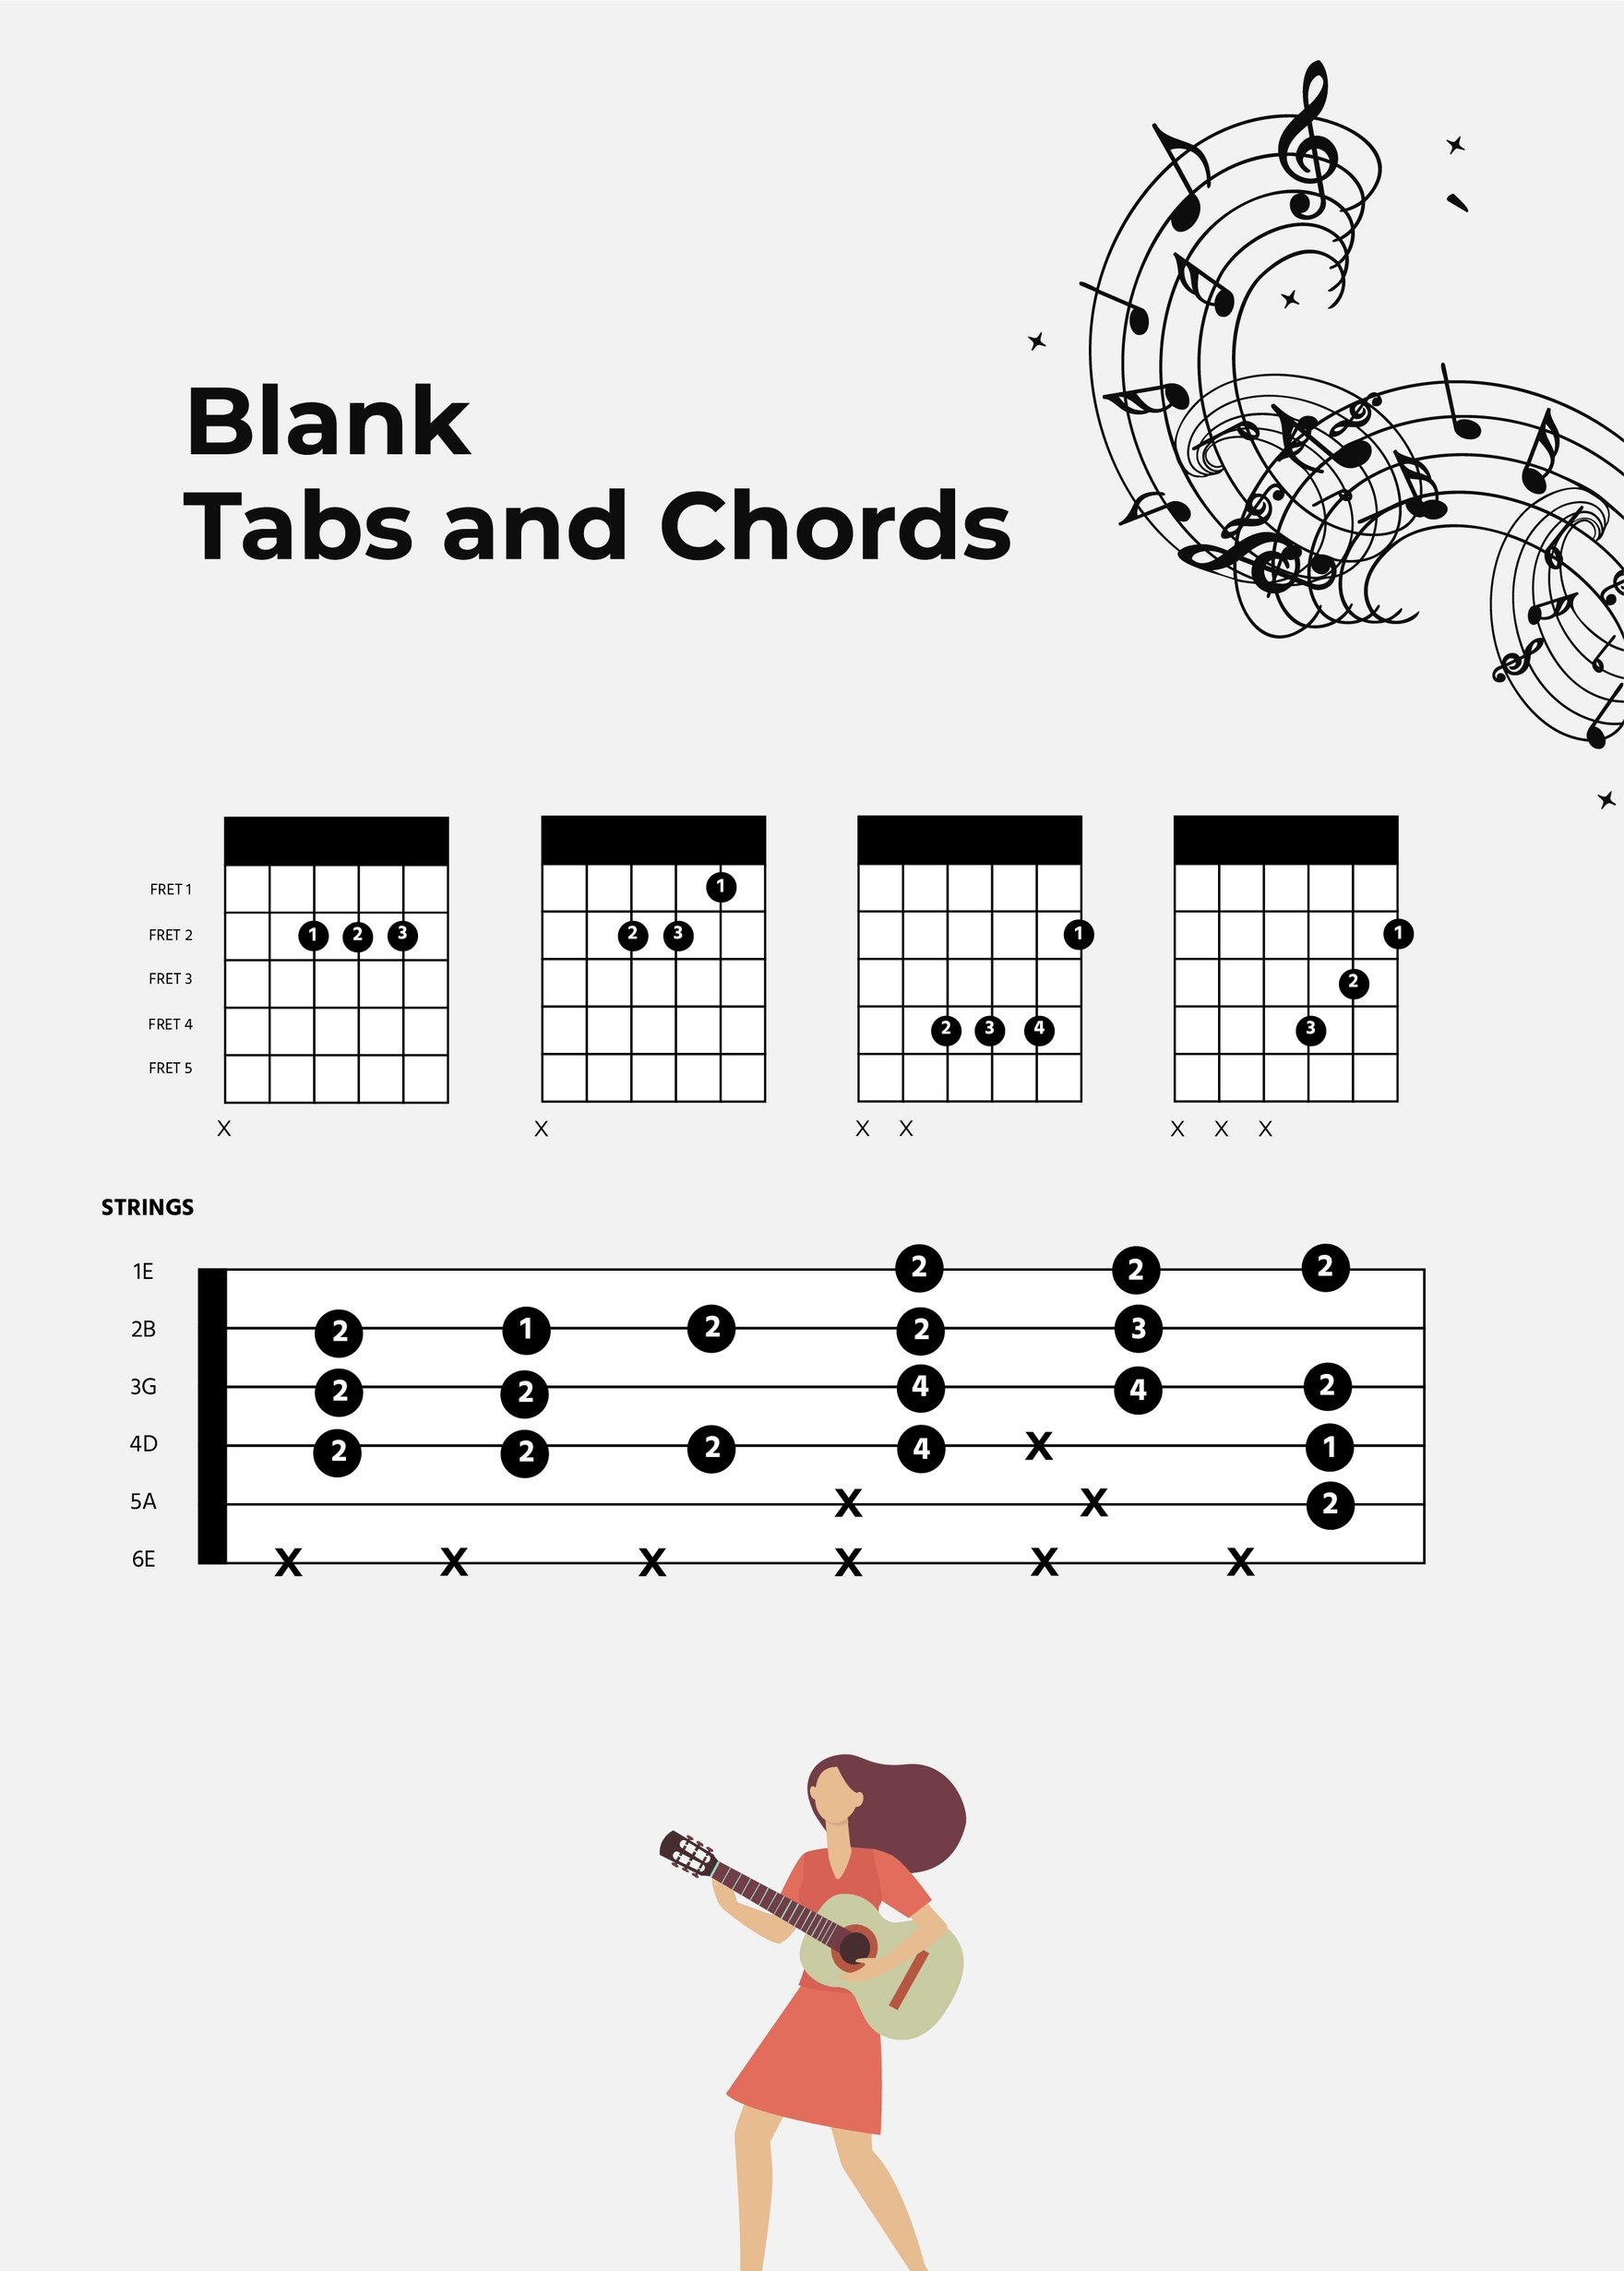 free-guitar-chords-chart-template-download-in-word-excel-pdf